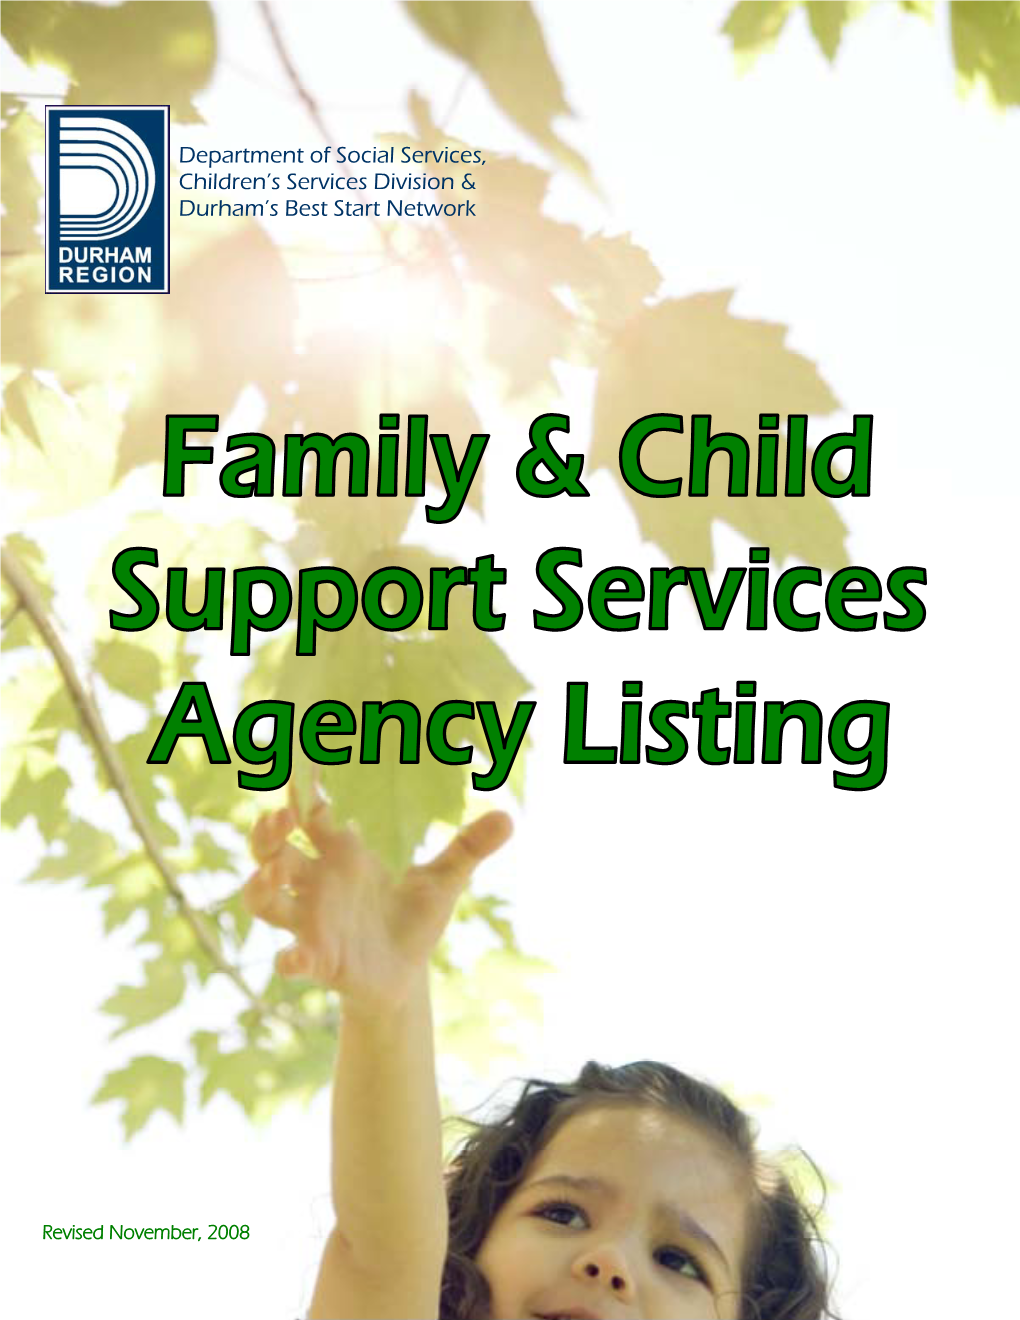 Family & Child Support Services Agency Listing